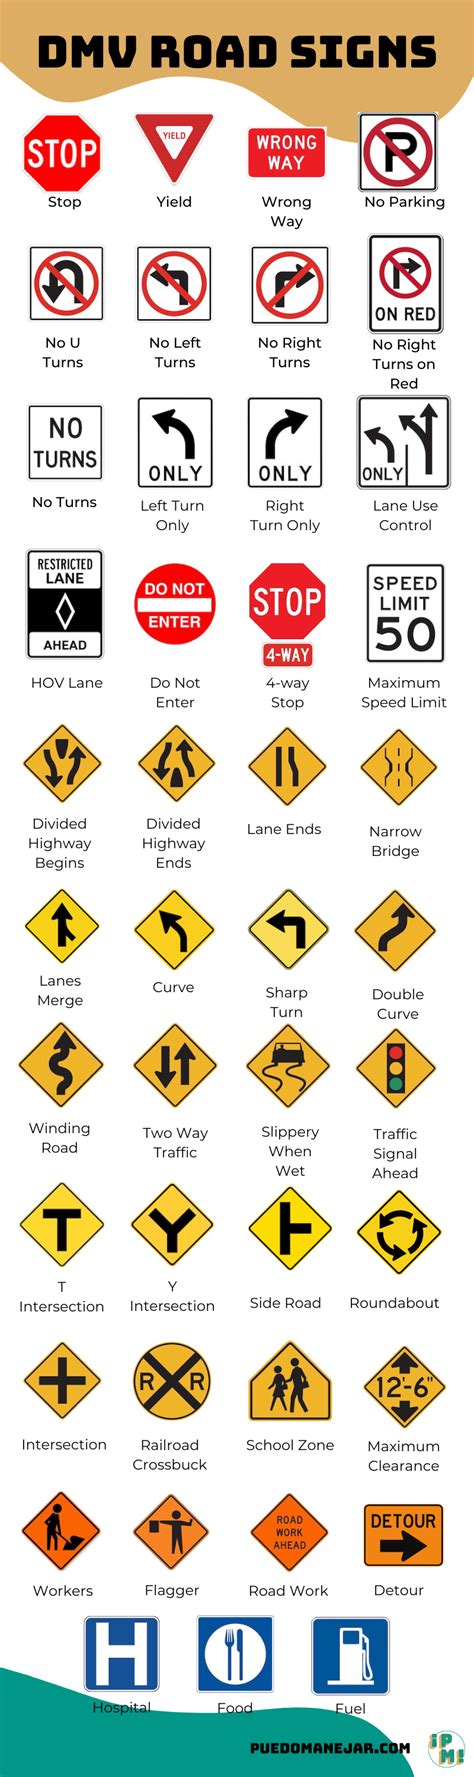 Dmv signs practice test in spanish. Road Signs Practice Test. 100 road signs questions to helping you understanding regulatory signs, warning signs, work zone signs, guide signs and service signs. This road signs test was designed to help you practice for the official DMV knowledge test. You can take a free road signs practice test! 